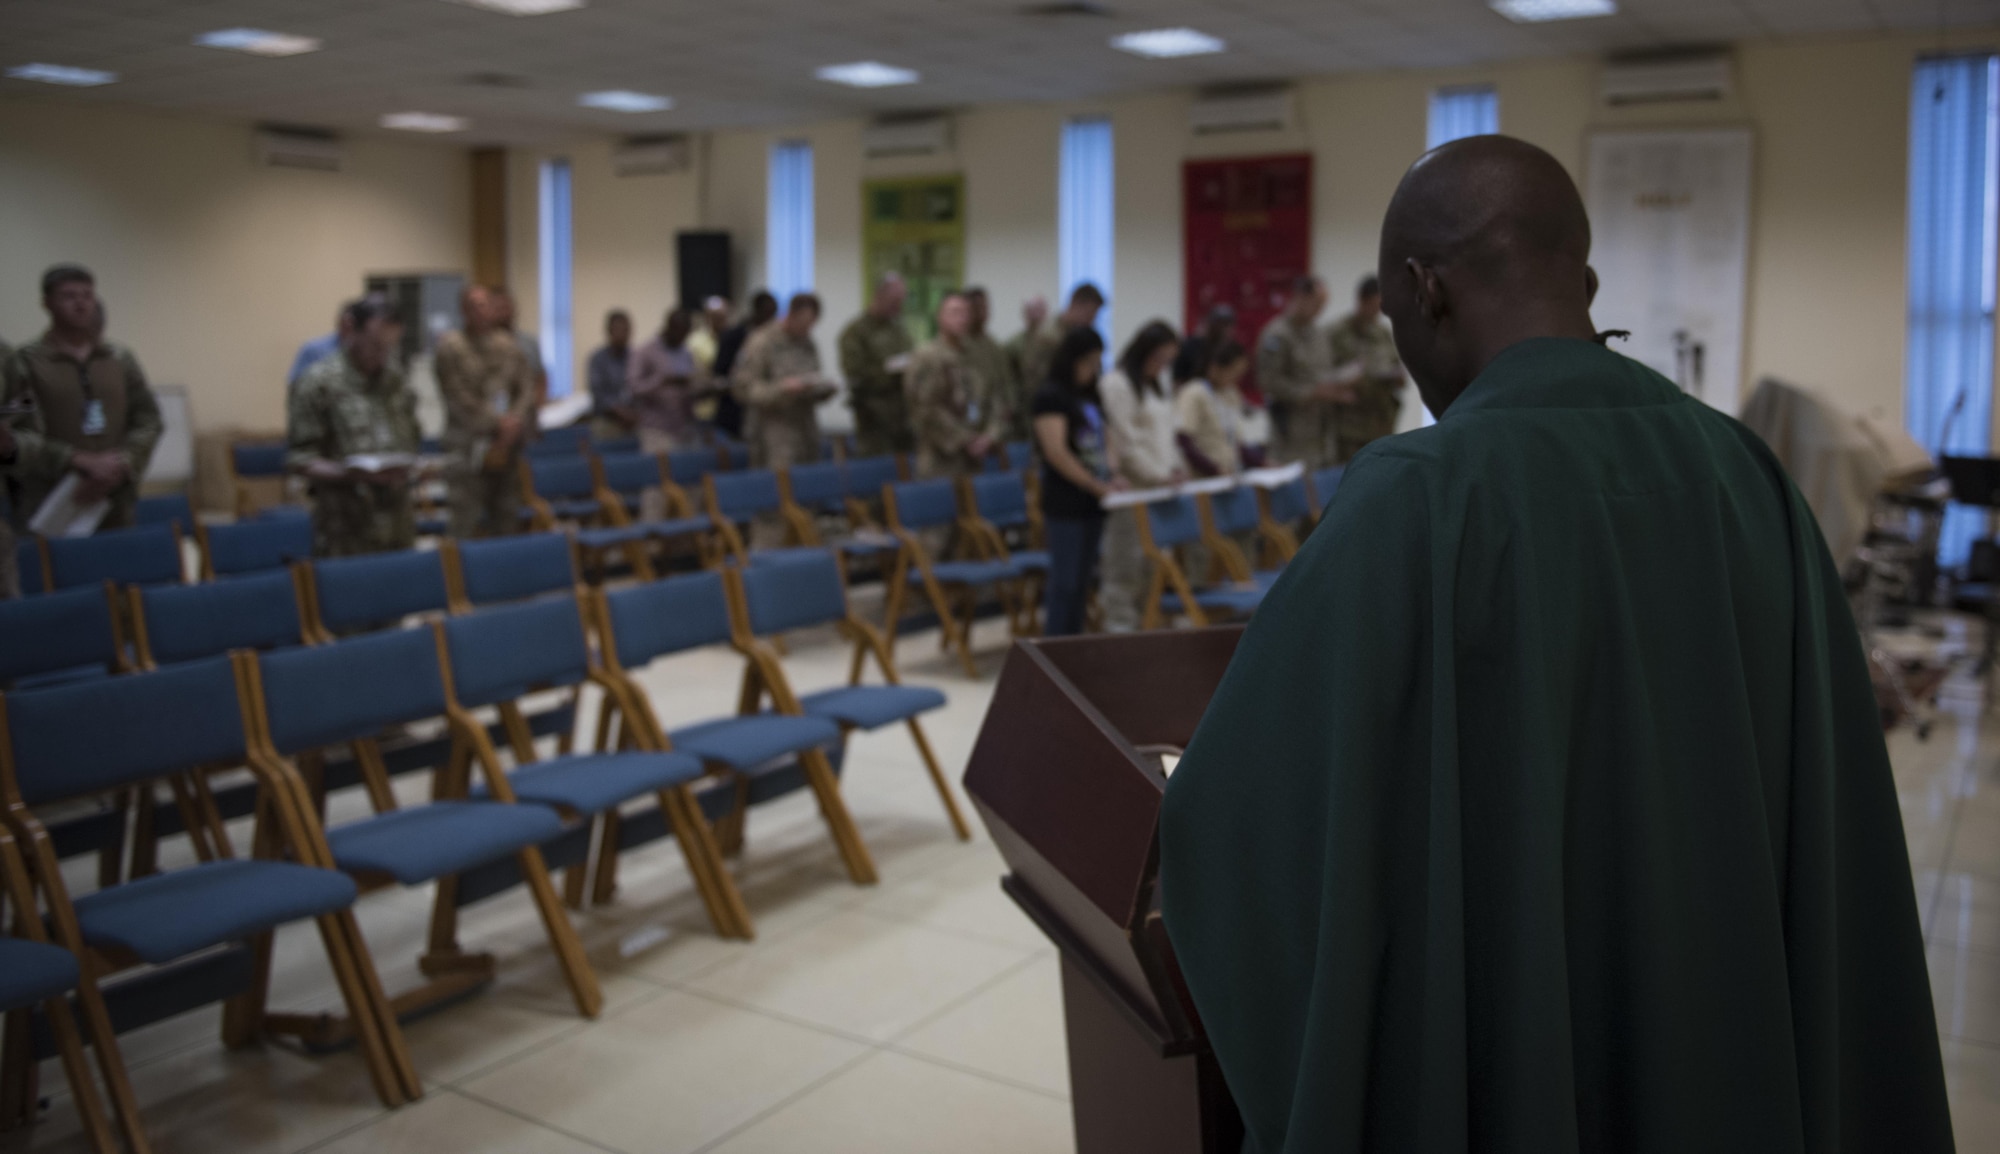 Chaplain (Capt.) John Appiah, 455th Air Expeditionary Wing, preaches during a religious service at Hamid Karzai International Airport, Kabul, Afghanistan, July 23, 2017. Religious support teams provide spiritual support to all members and find ways to meet the needs of individuals who do not have the resources to practice their faith in a deployed location. (U.S. Air Force photo by Staff Sgt. Benjamin Gonsier)